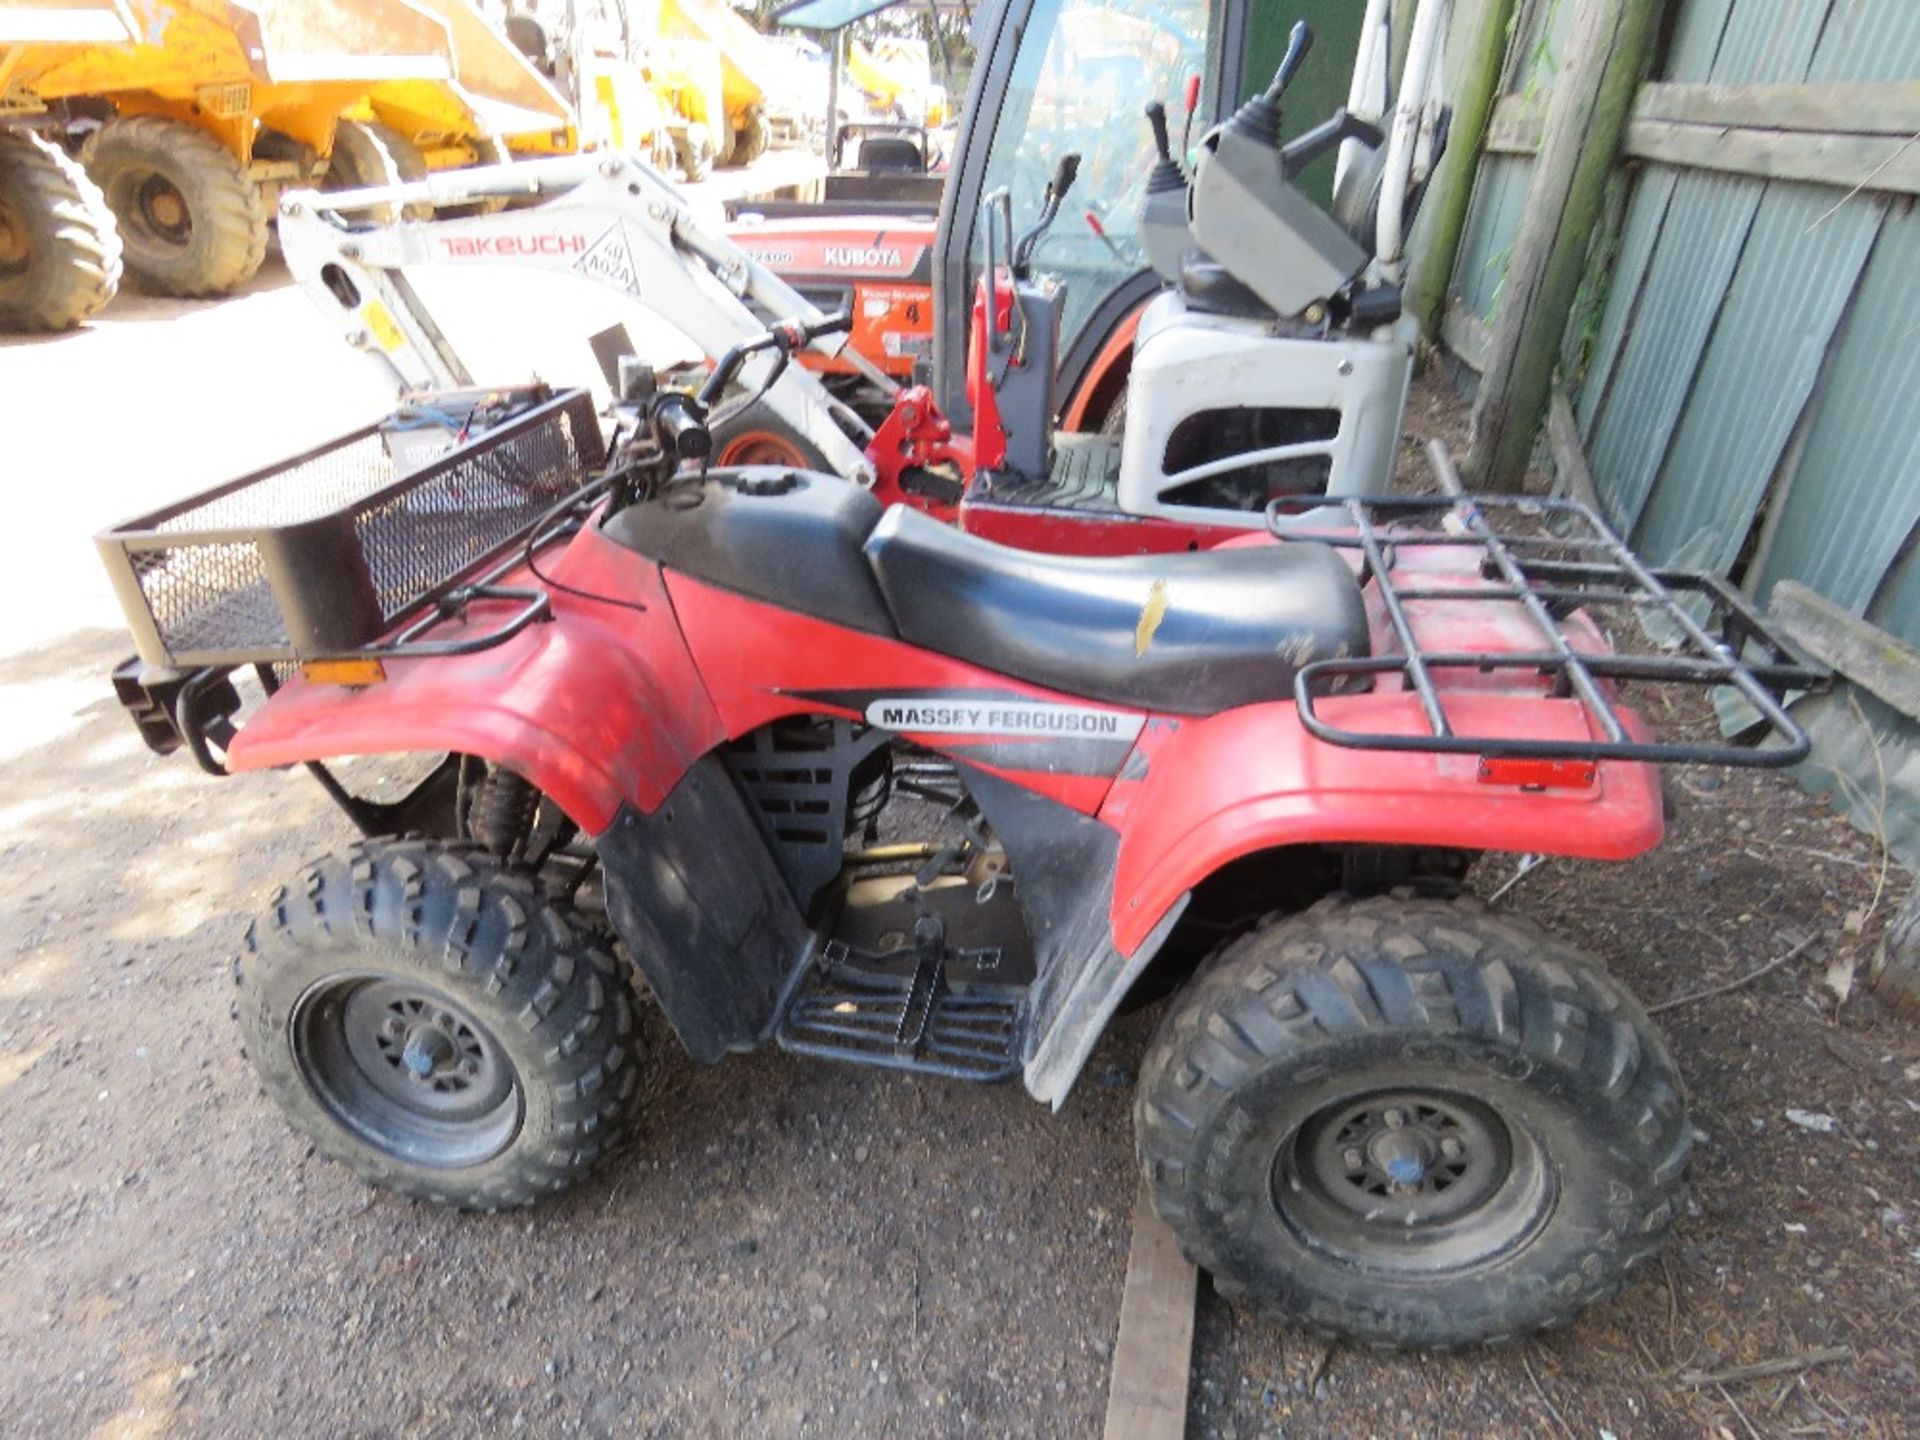 MASSEYT FERGSUON 300 2WD QUAD BIKE, DIRECT EX FARM BEING SURPLUS TO REQUIREMENTS (WAS USED FOR FOOTP